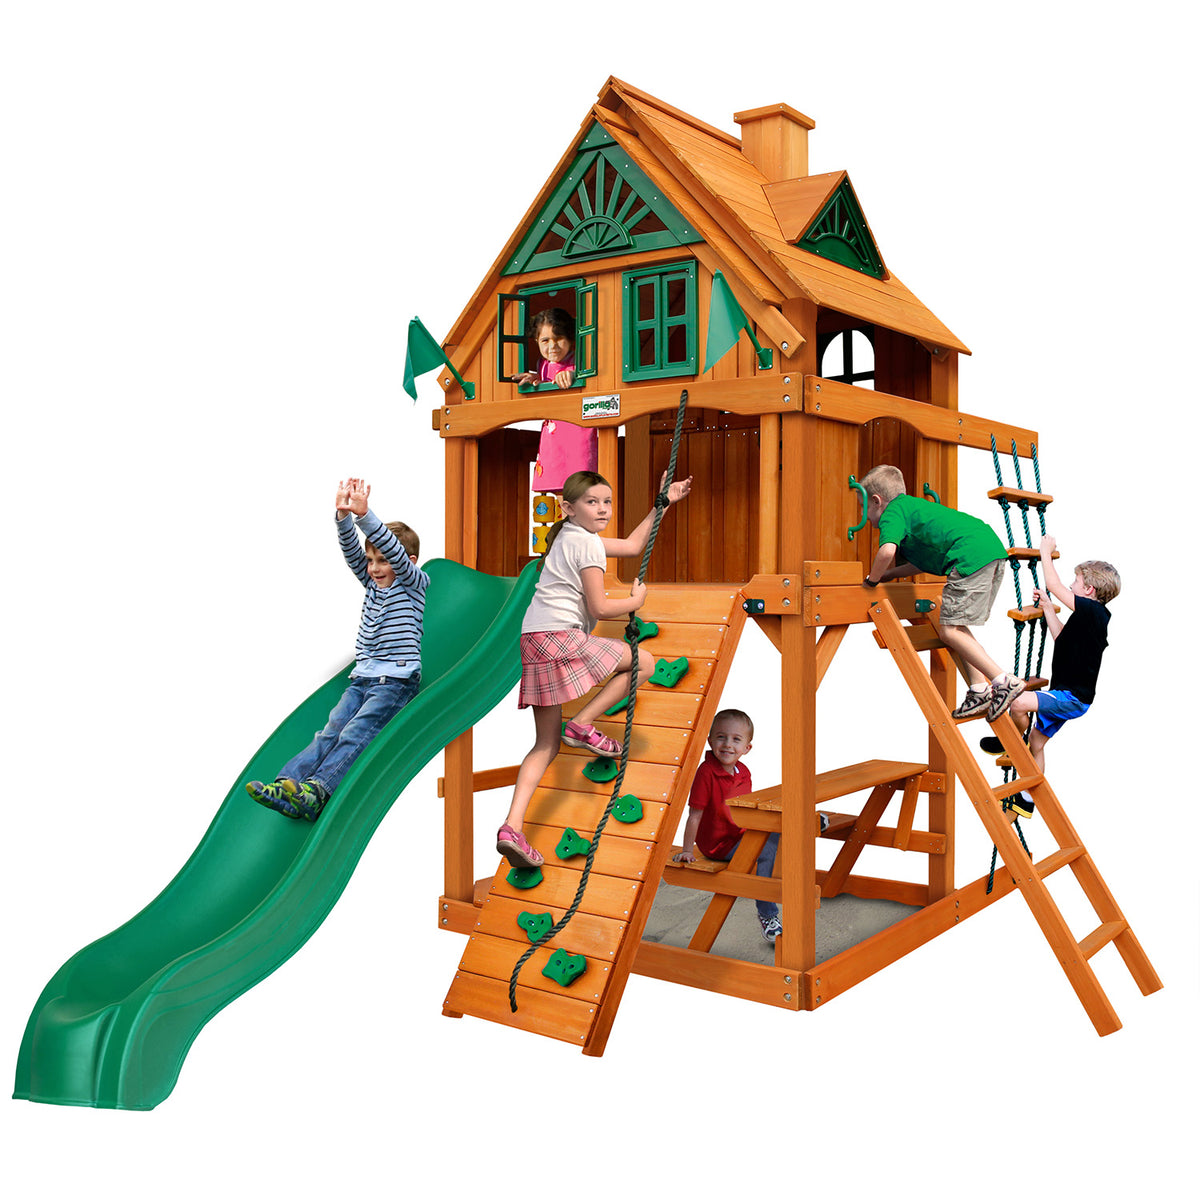 Gorilla-Playsets-Chateau-Tower-TH-W-Fort-Wooden-Swingset-White-Back